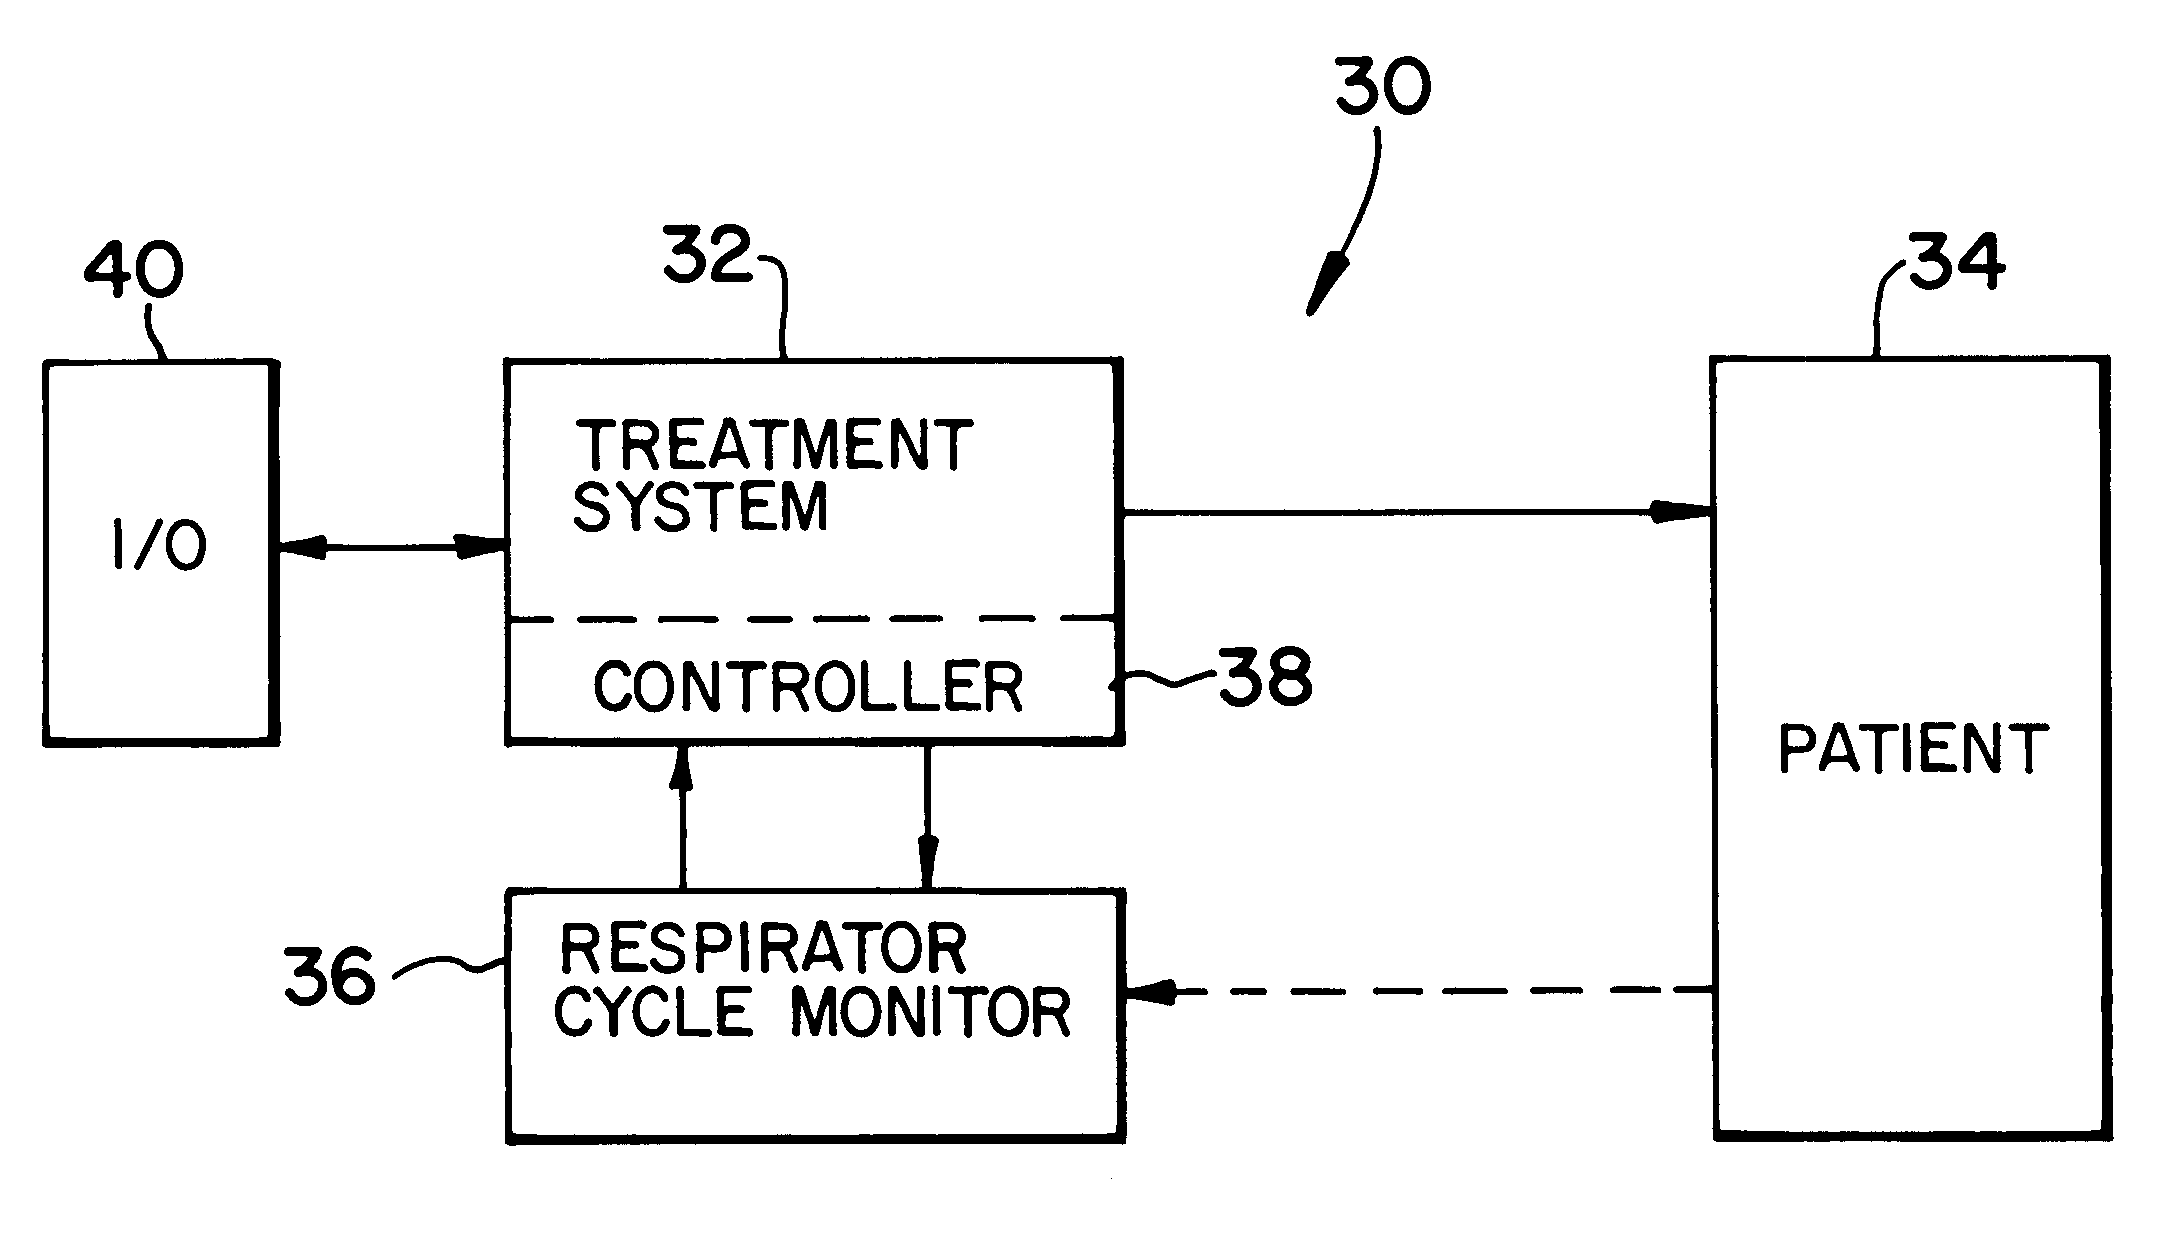 Breath-based control of a therapeutic treatment